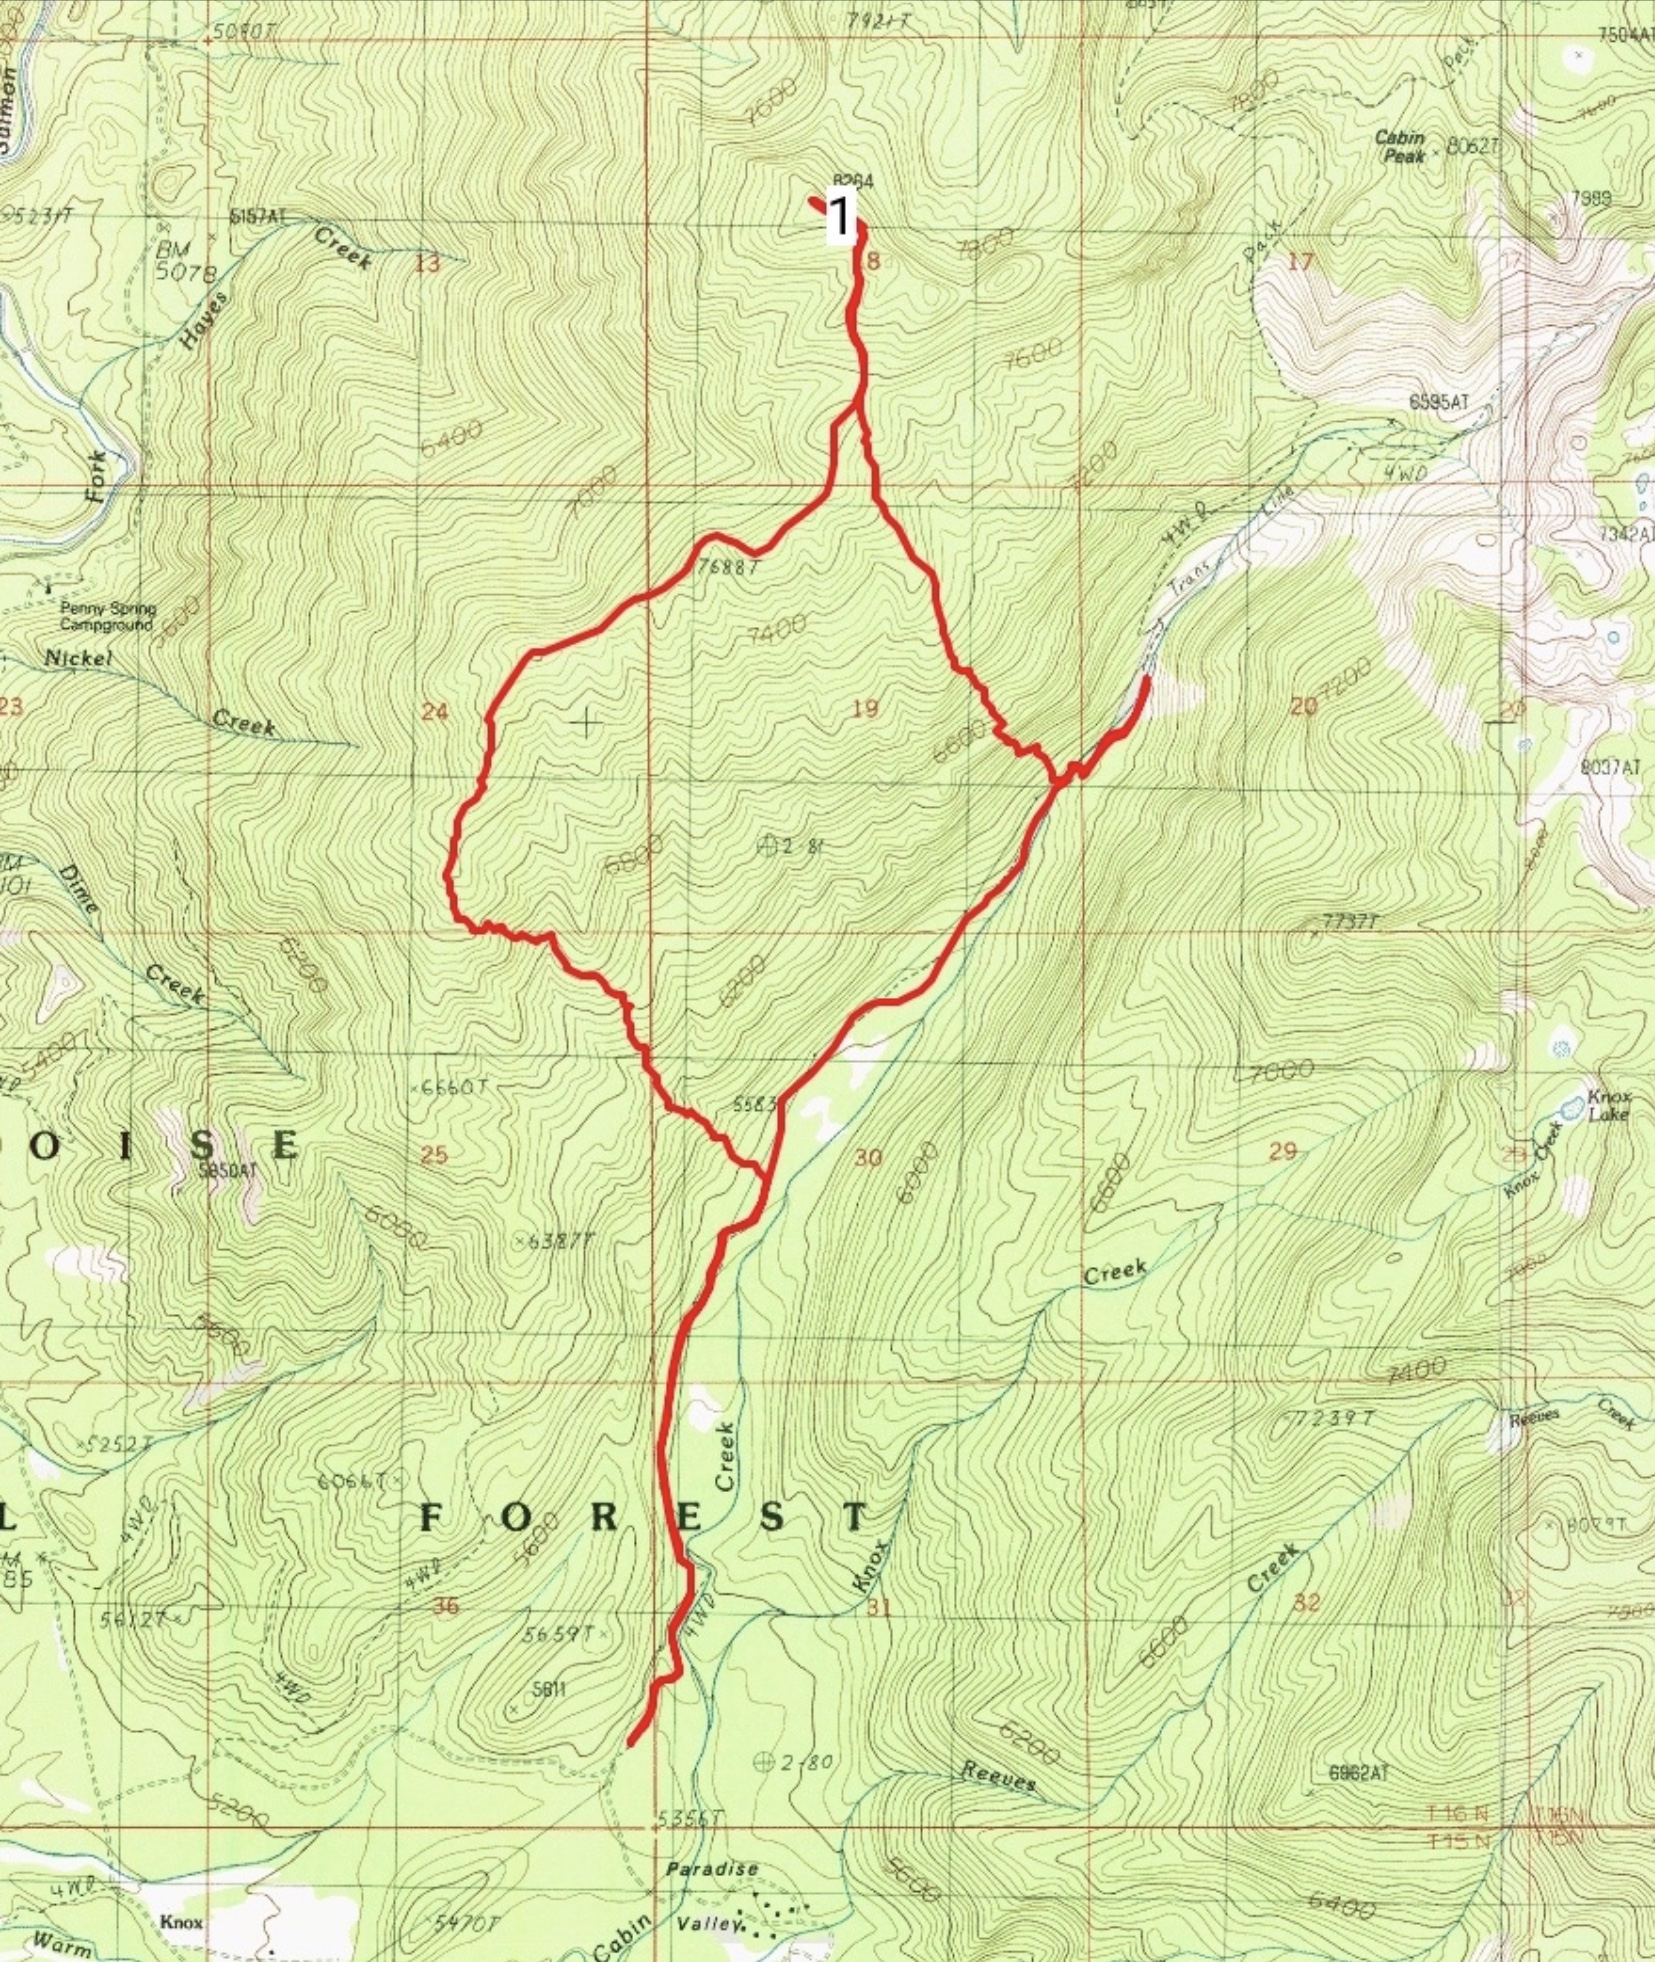 John’s GPS track. His route encompassed 9.8 miles with 3,340 feet of gain round trip.